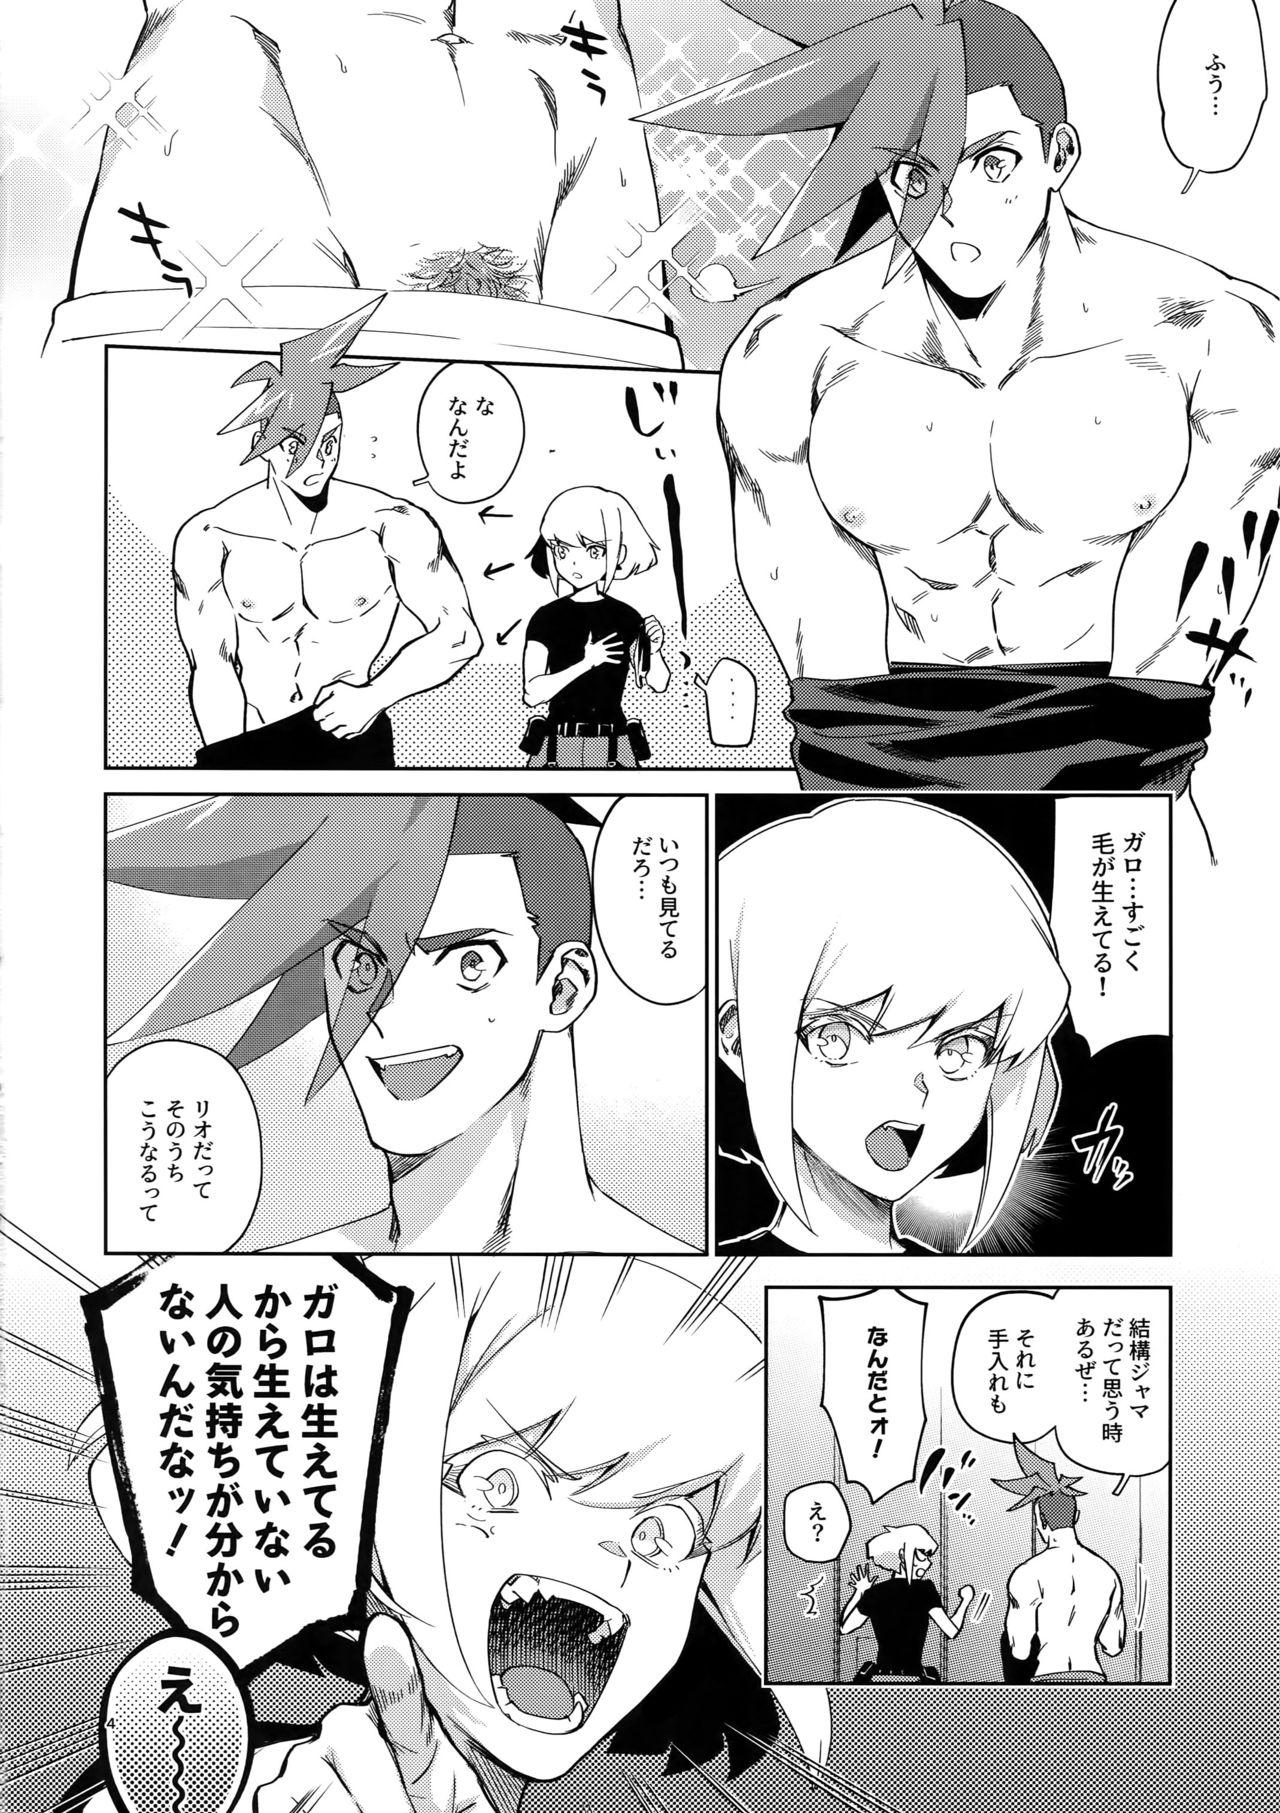 Jizz One and Only - Promare Porn Star - Page 3